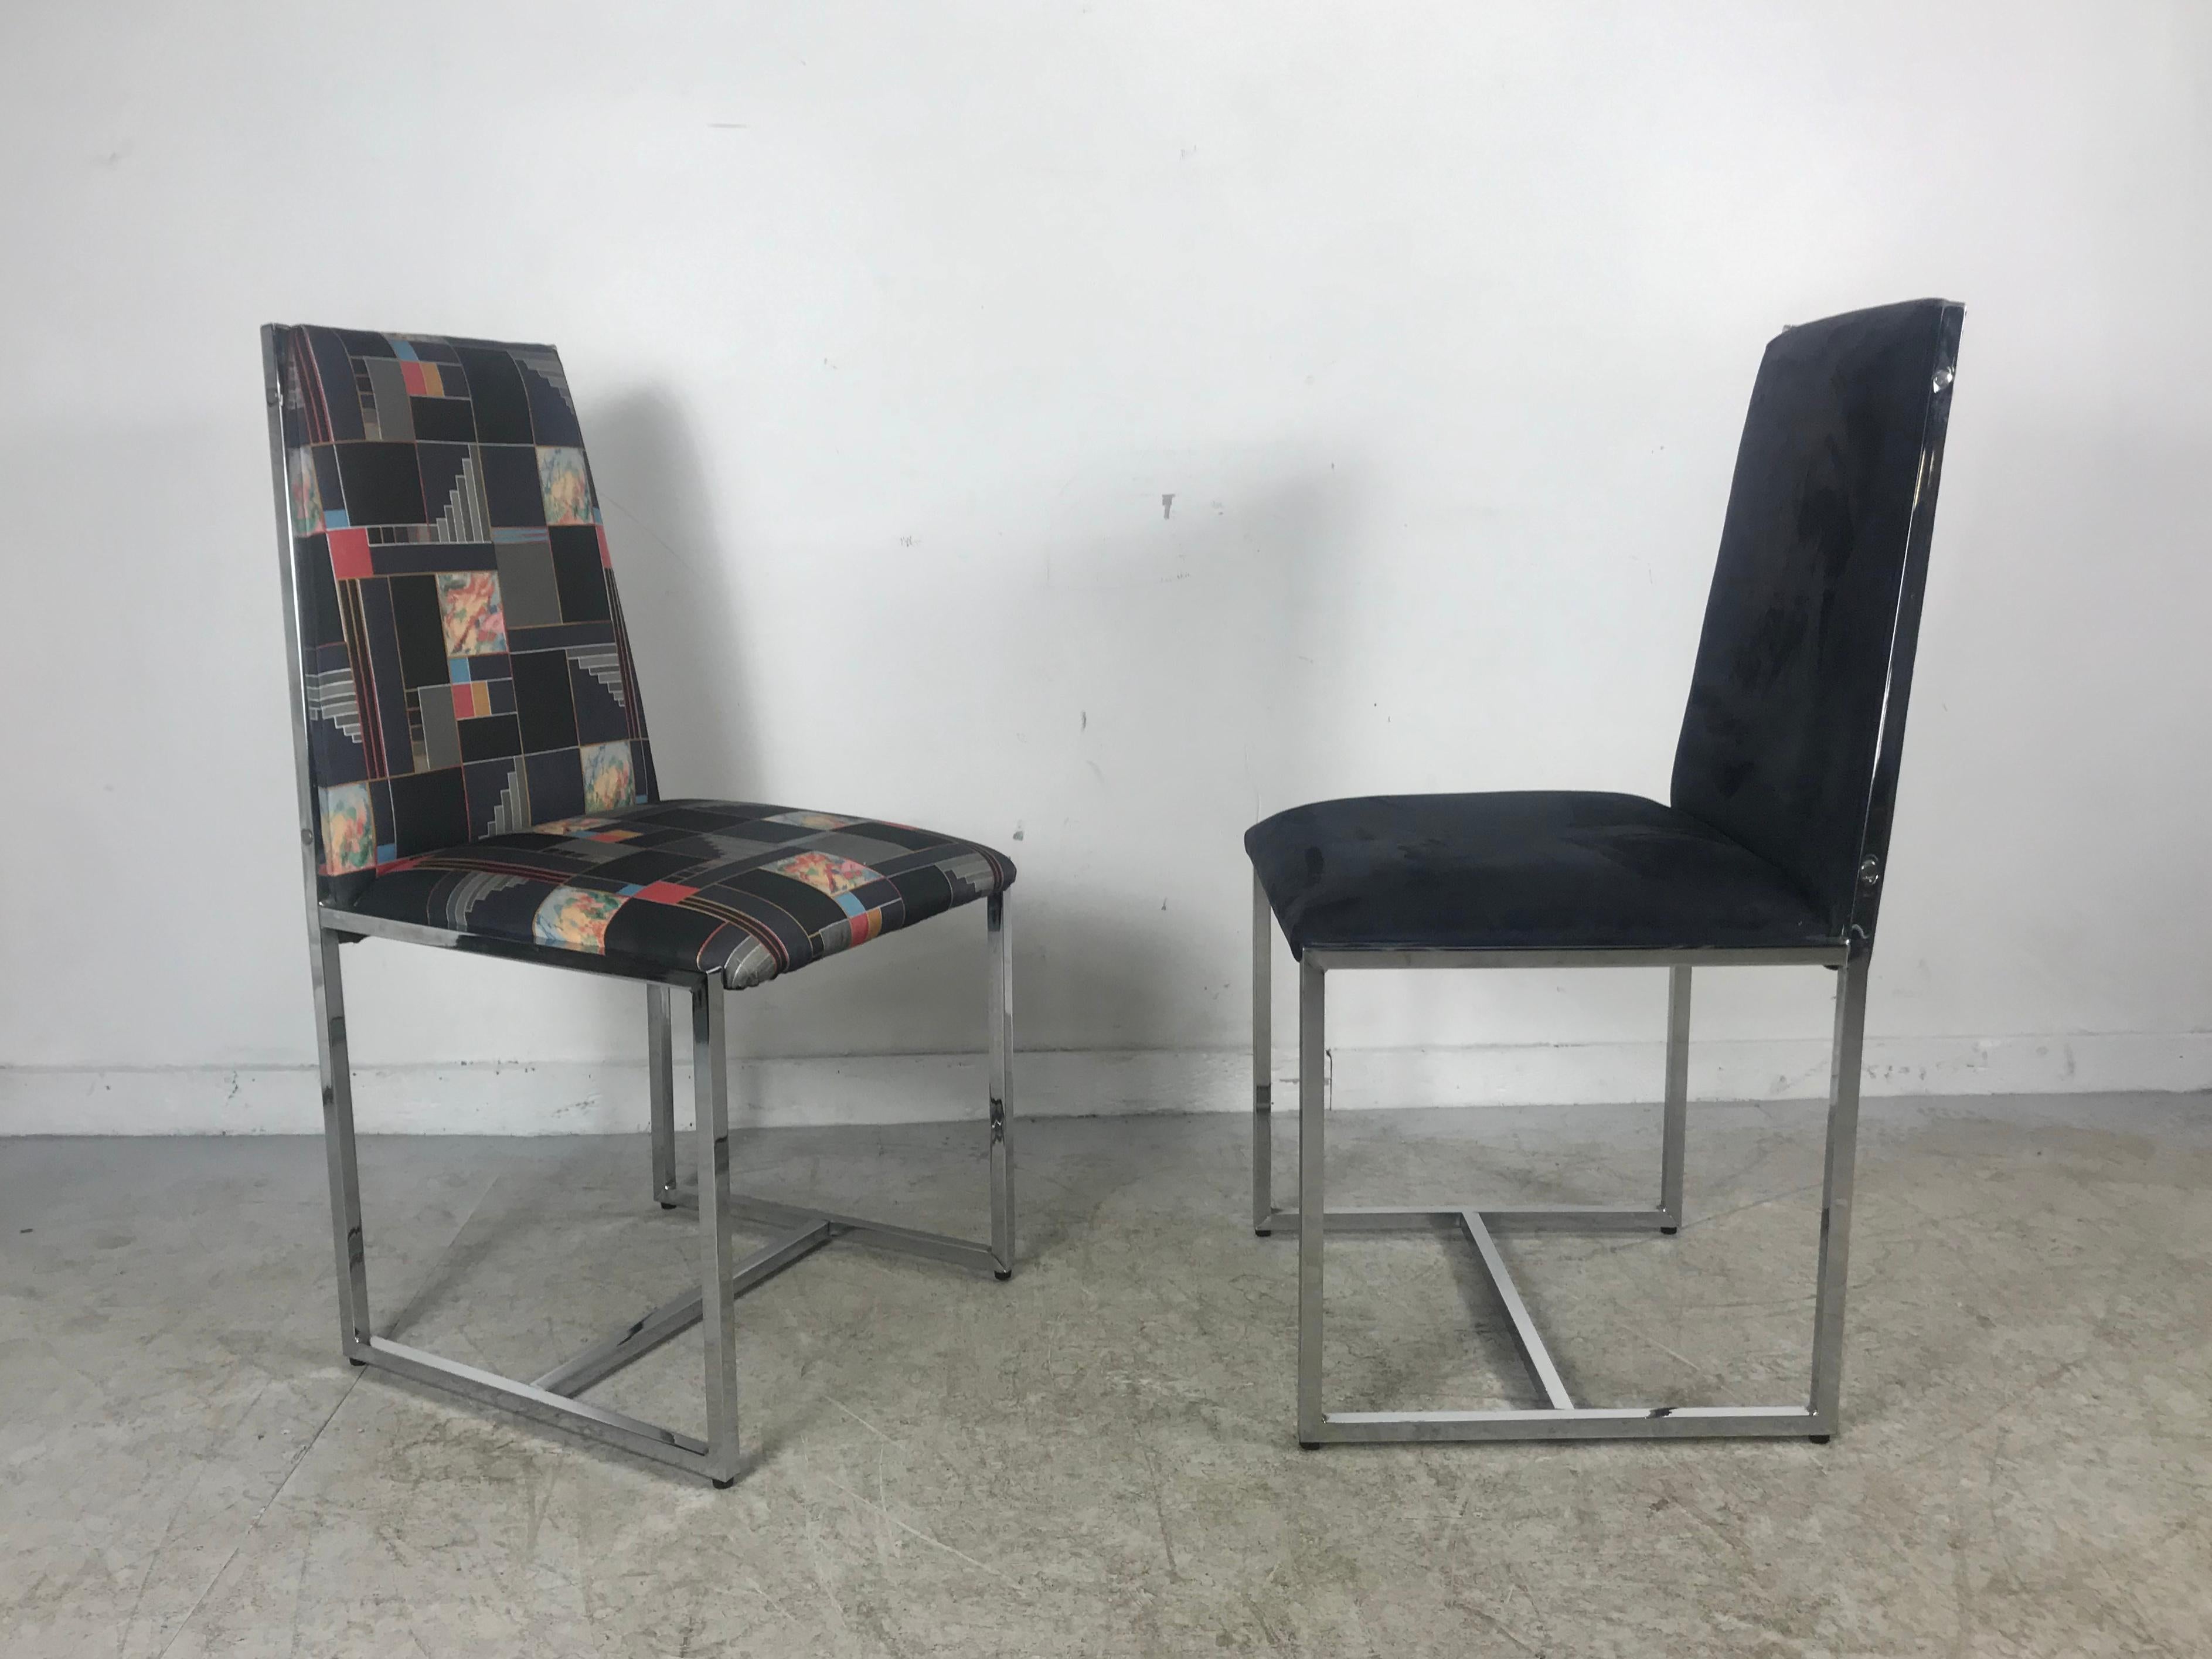 Classic set of six 1970s chrome and suede dining chairs in the style of Milo Baughman. Stunning stylized side chairs, chairs have recently been restored, reupholstered, four with quality black suede, two with high end geometric fabric. Extremely